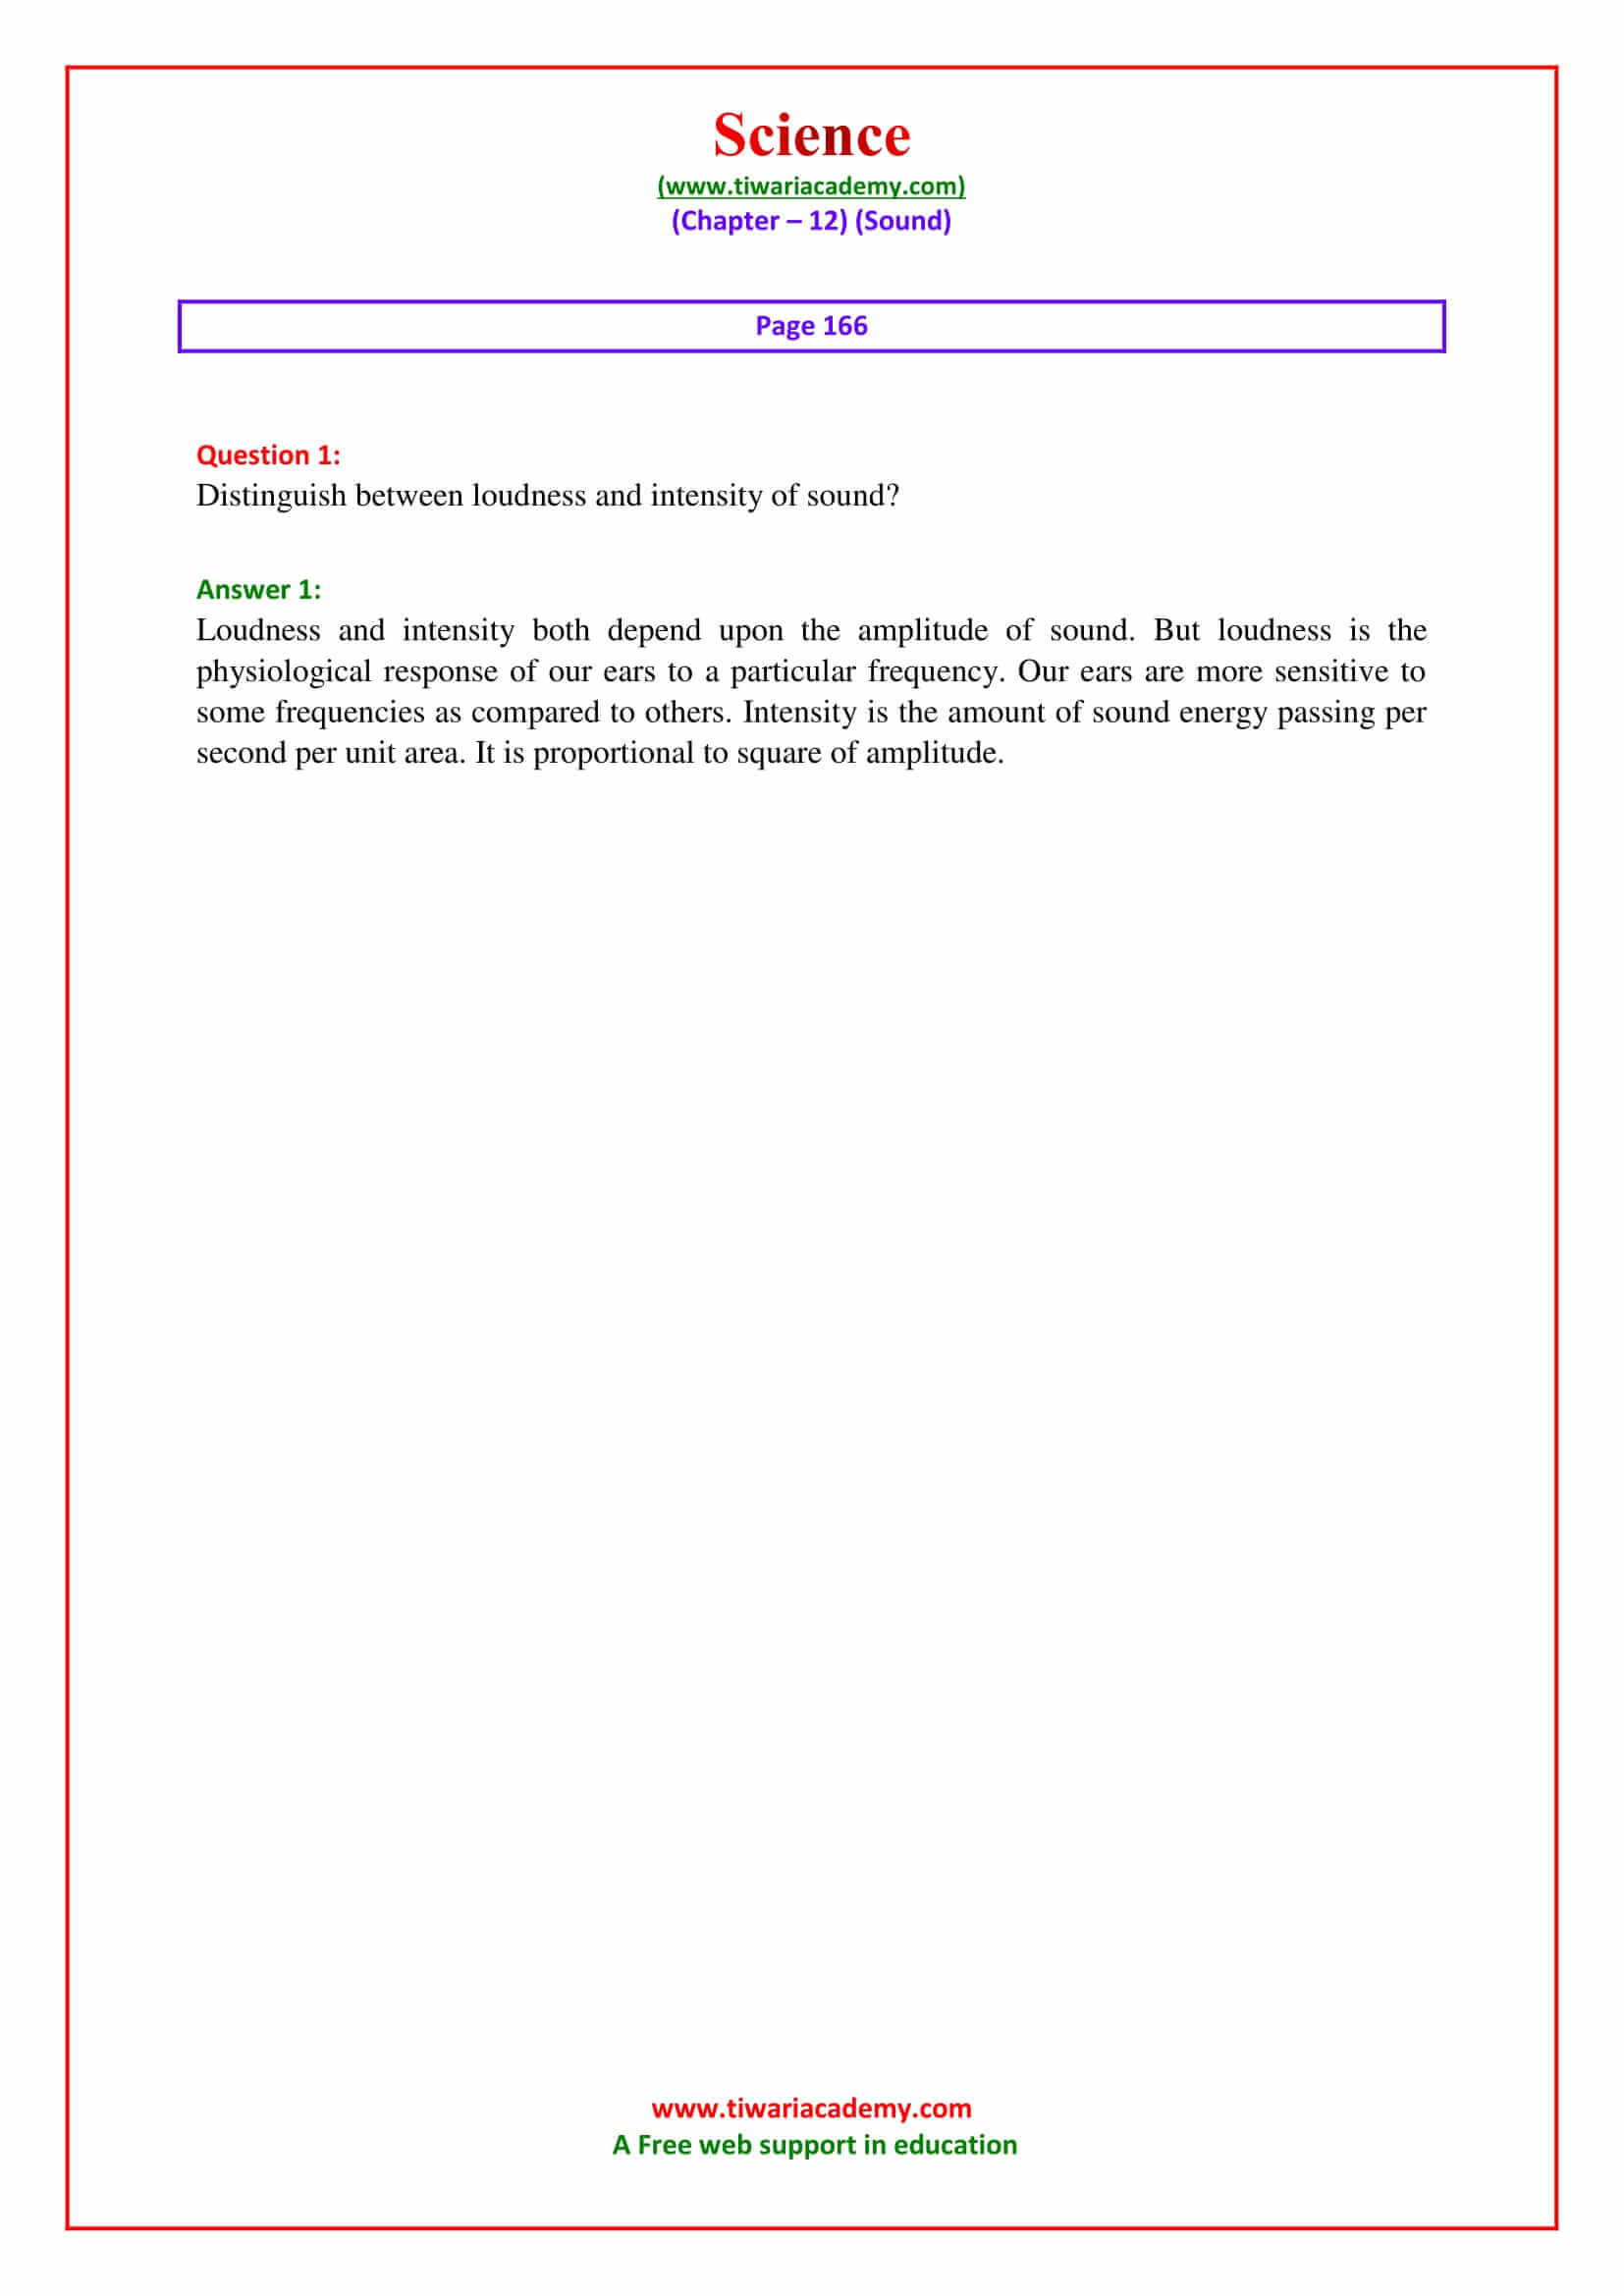 NCERT Solutions for Class 9 Science Chapter 12 Sound page 166 all answers